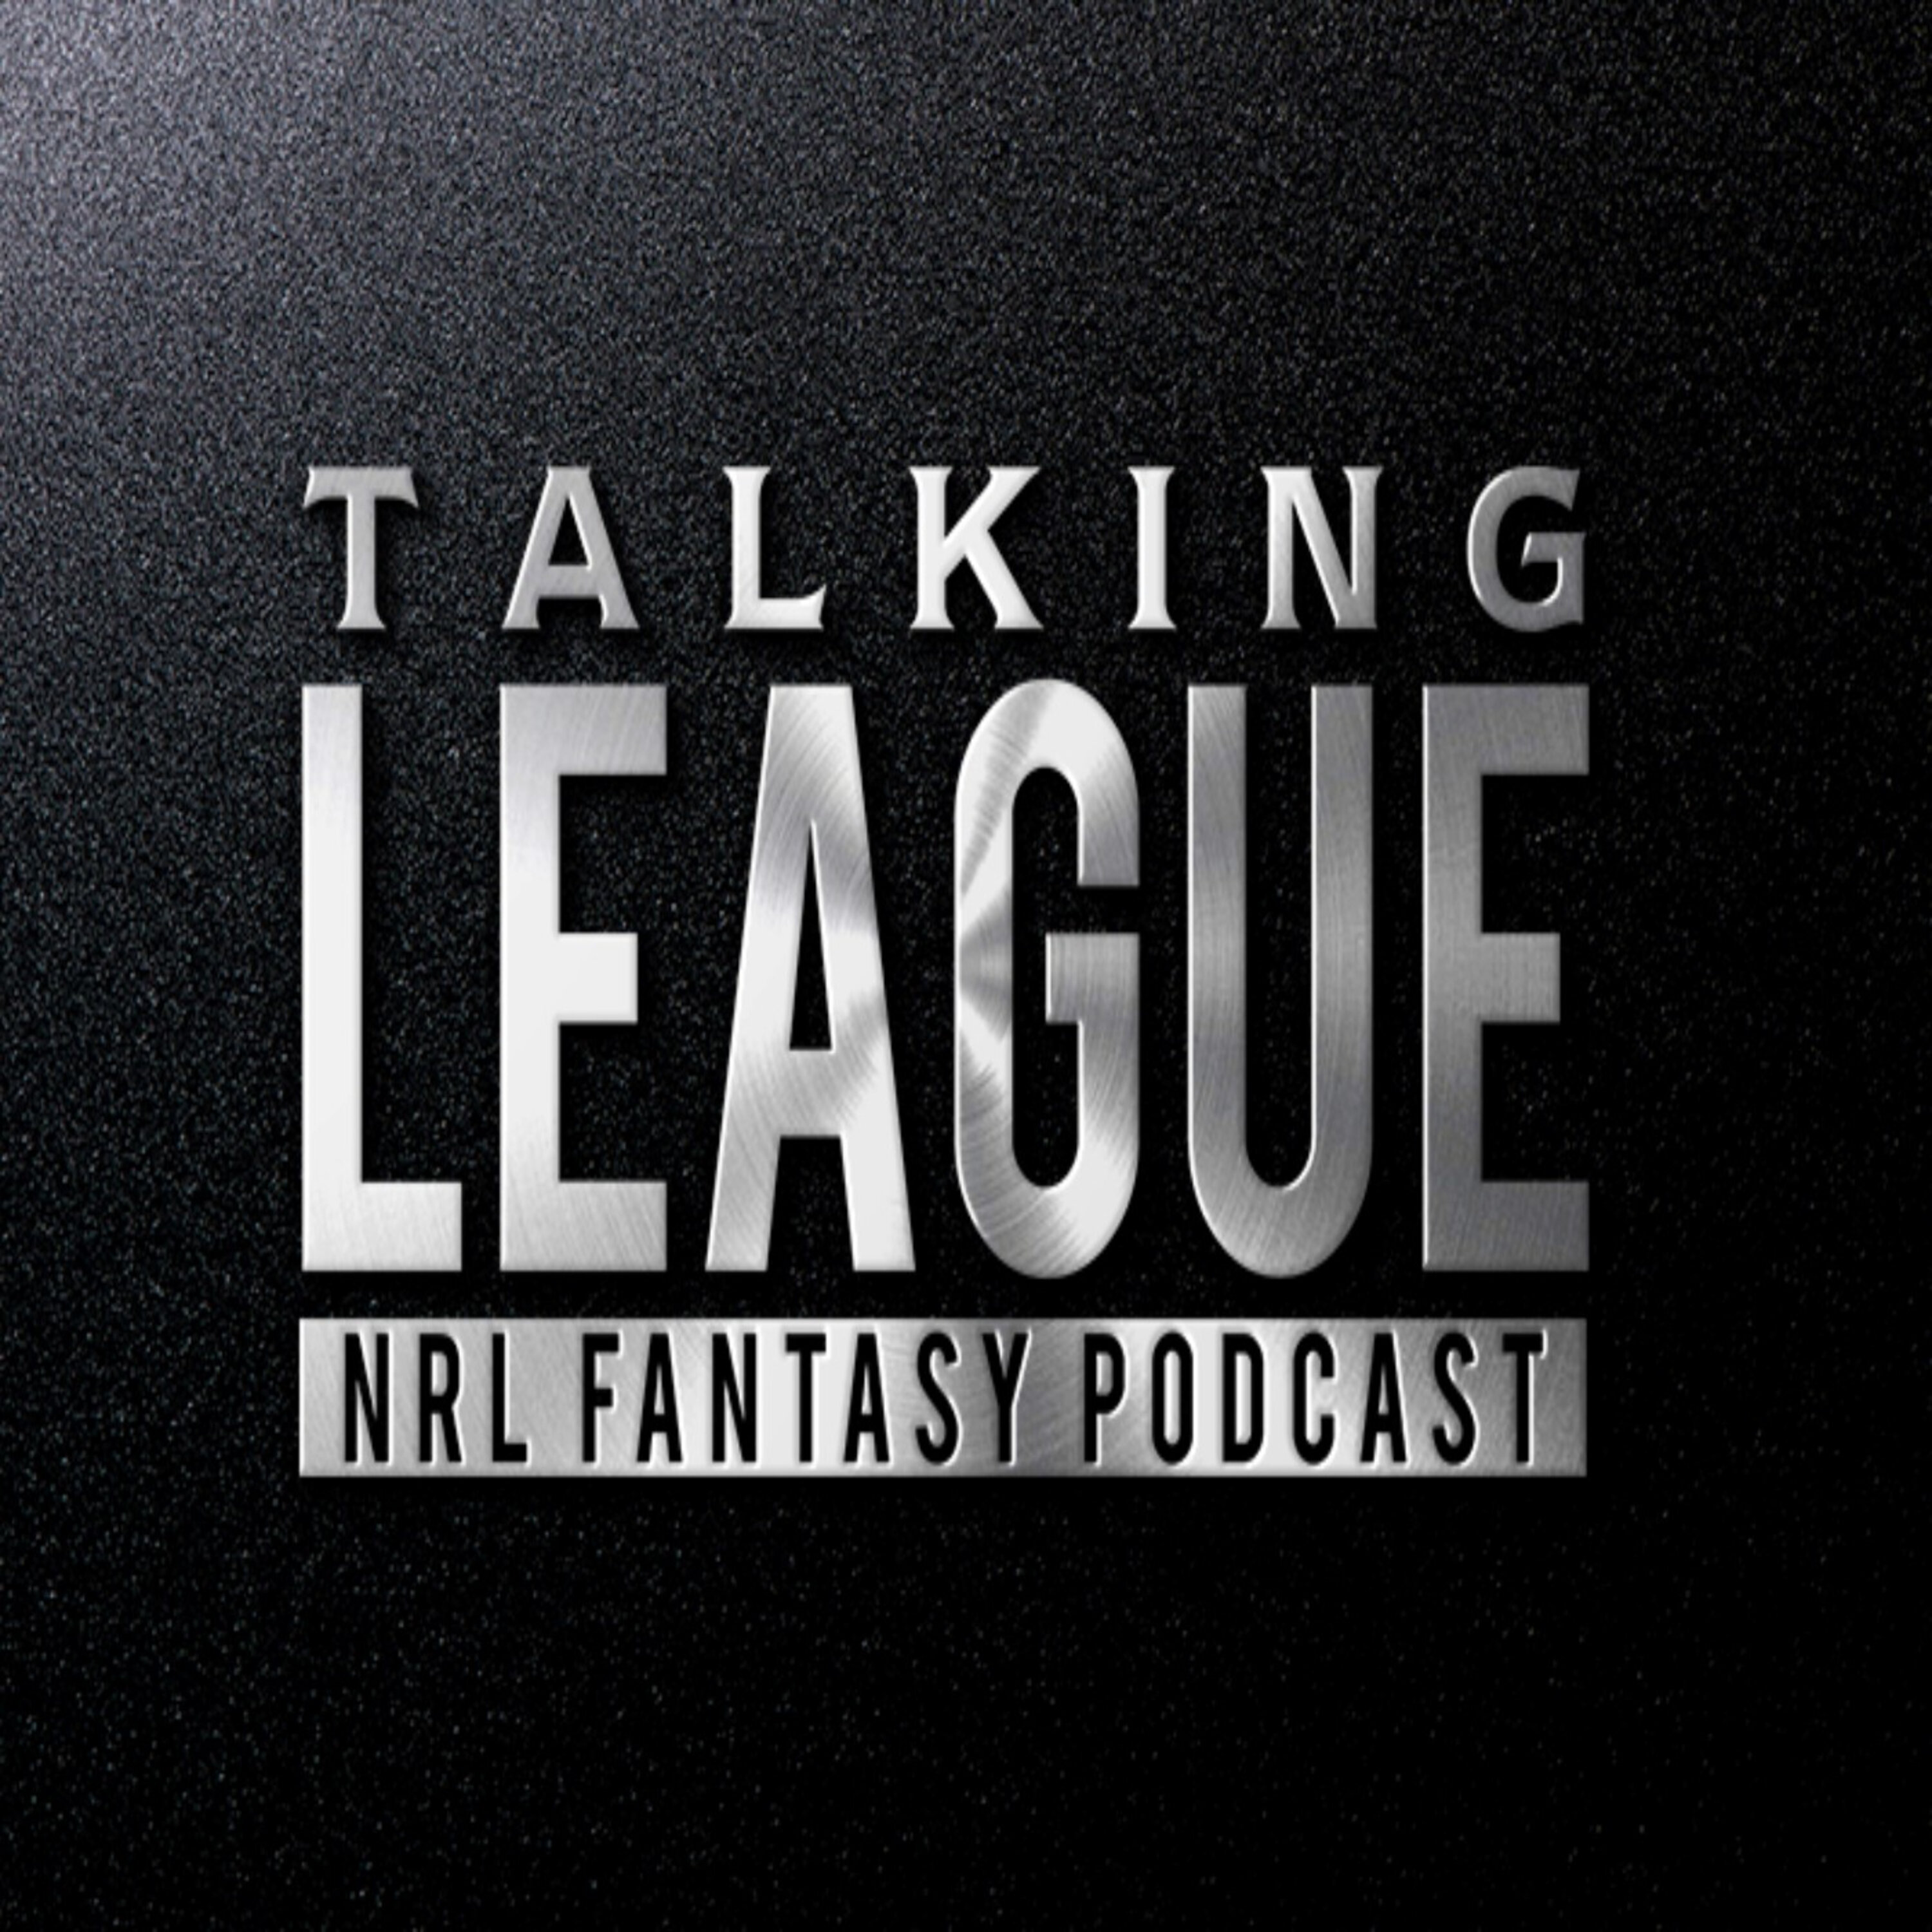 Teaching the SC Champions podcast how to play NRL Fantasy - part 2 of our cross over series